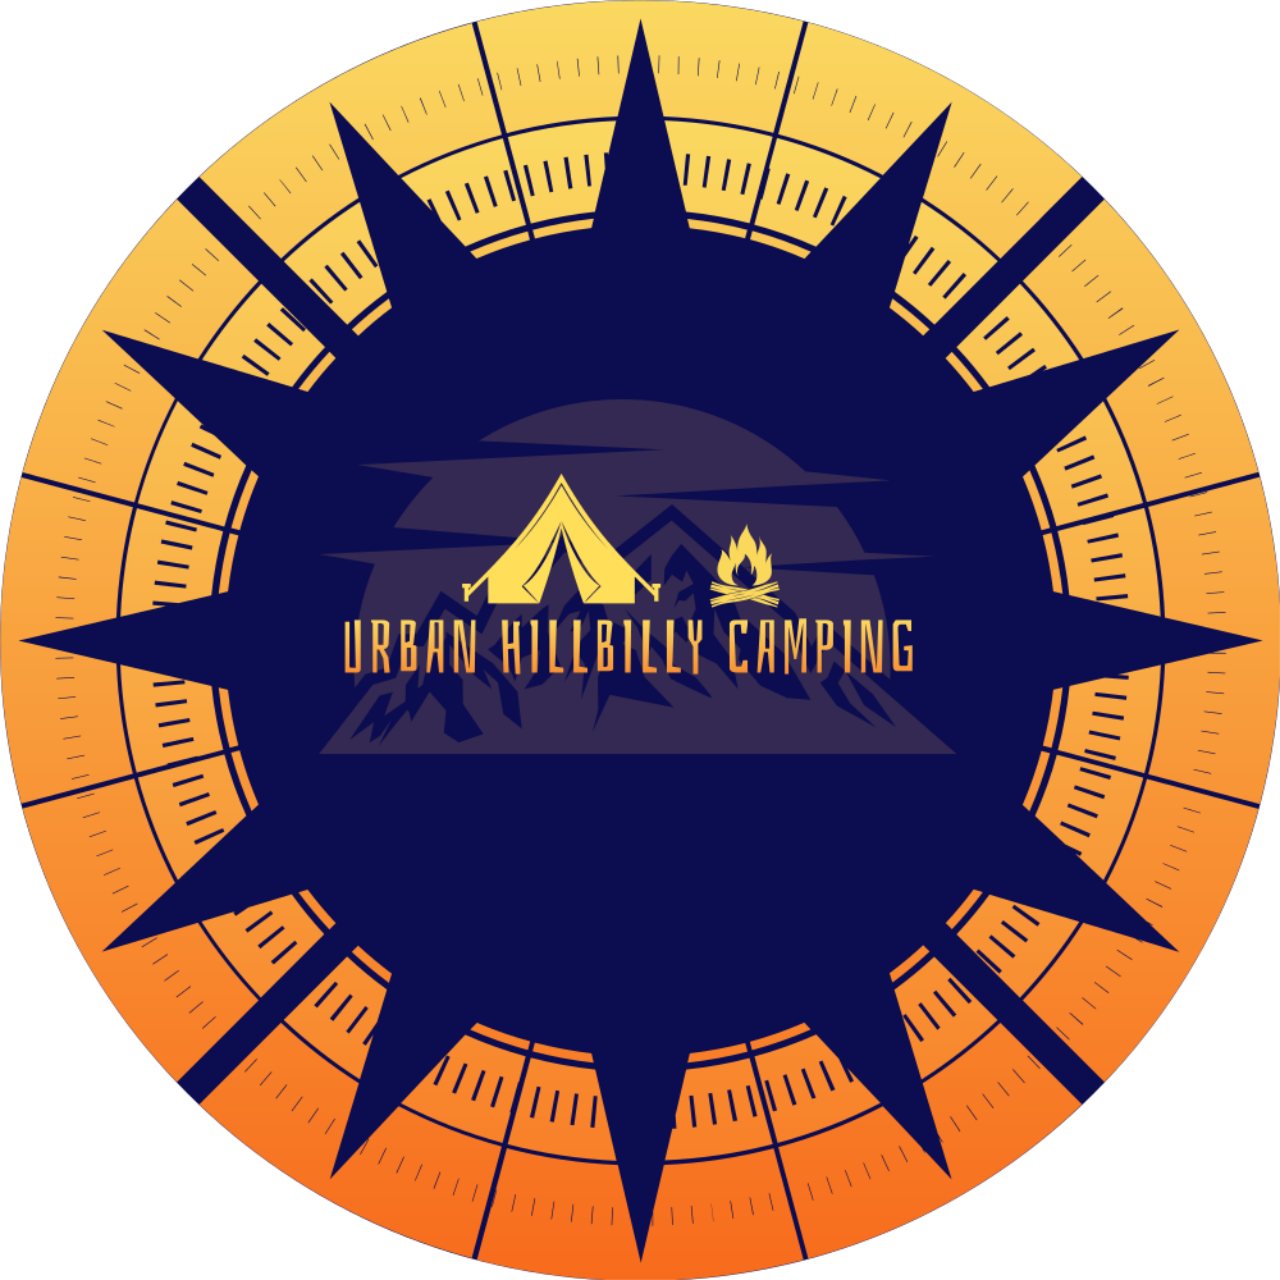 Urban Hillbilly Camping's web page